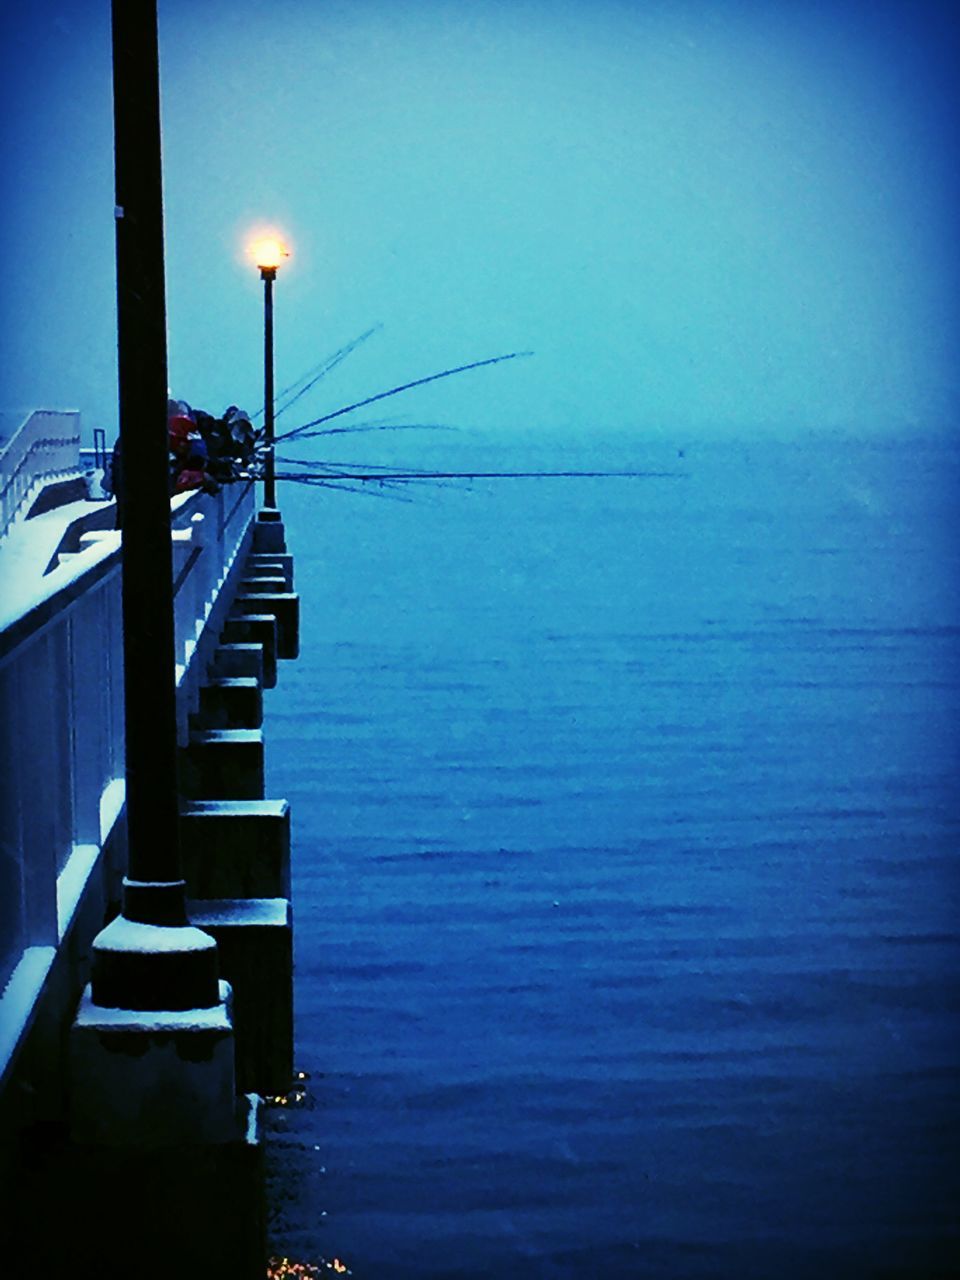 water, sea, sky, nature, architecture, no people, lighting equipment, built structure, nautical vessel, beauty in nature, transportation, mode of transportation, blue, illuminated, horizon, railing, auto post production filter, dusk, outdoors, horizon over water